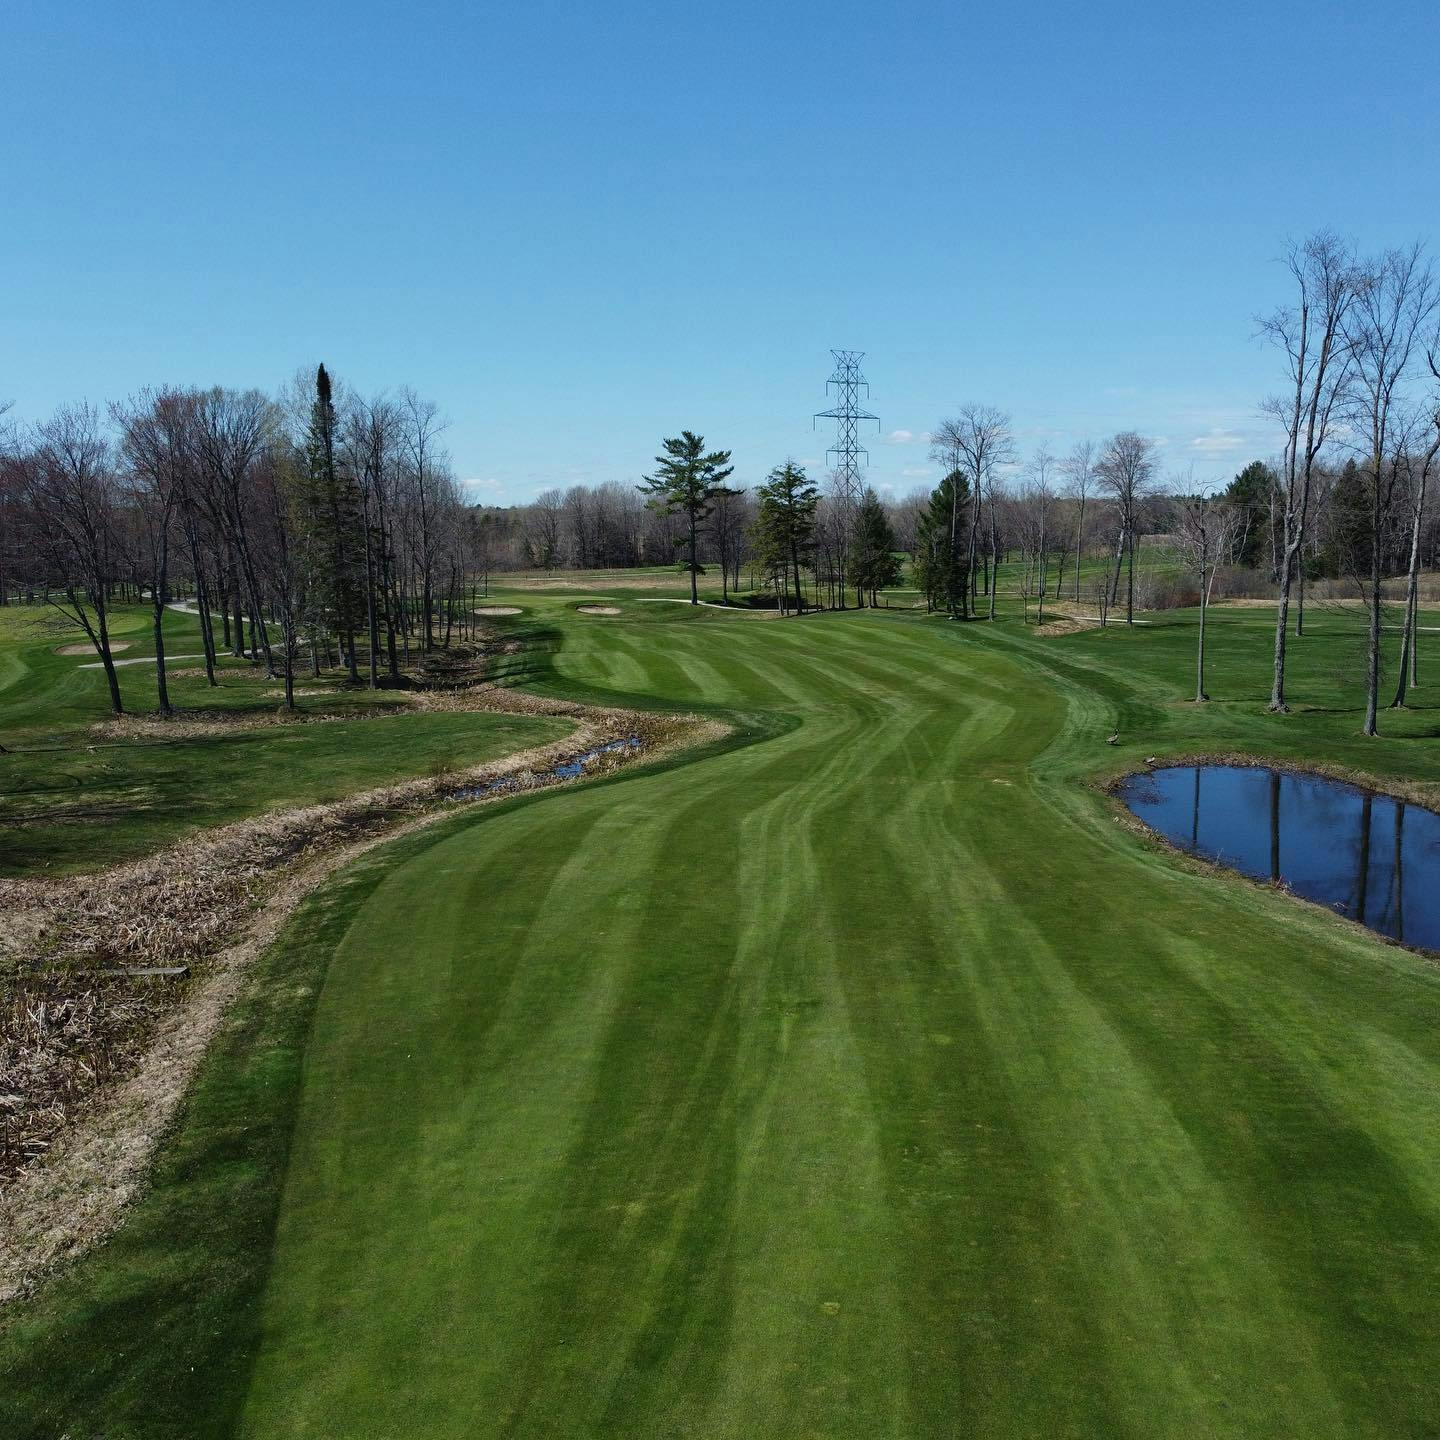 Some photos from April 27th last year. Spring golf is almost here! #PlayTheLake